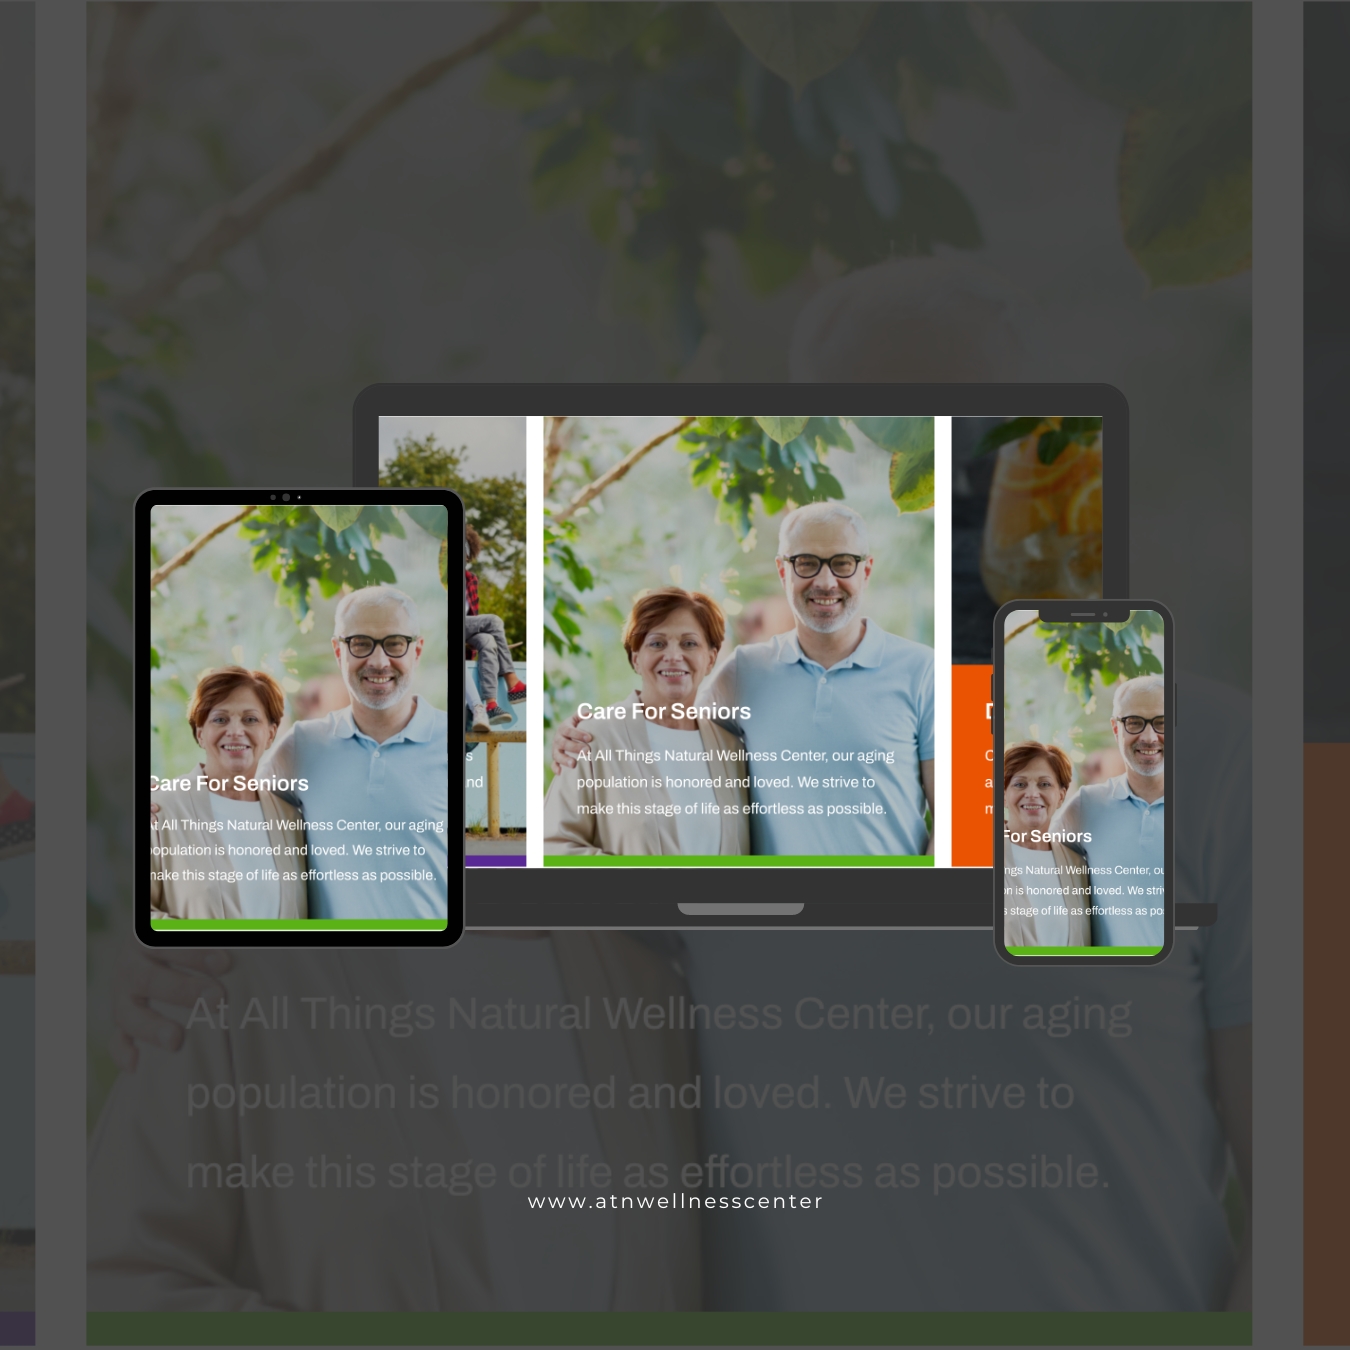 All Things Natural Wellness Center care for seniors services image